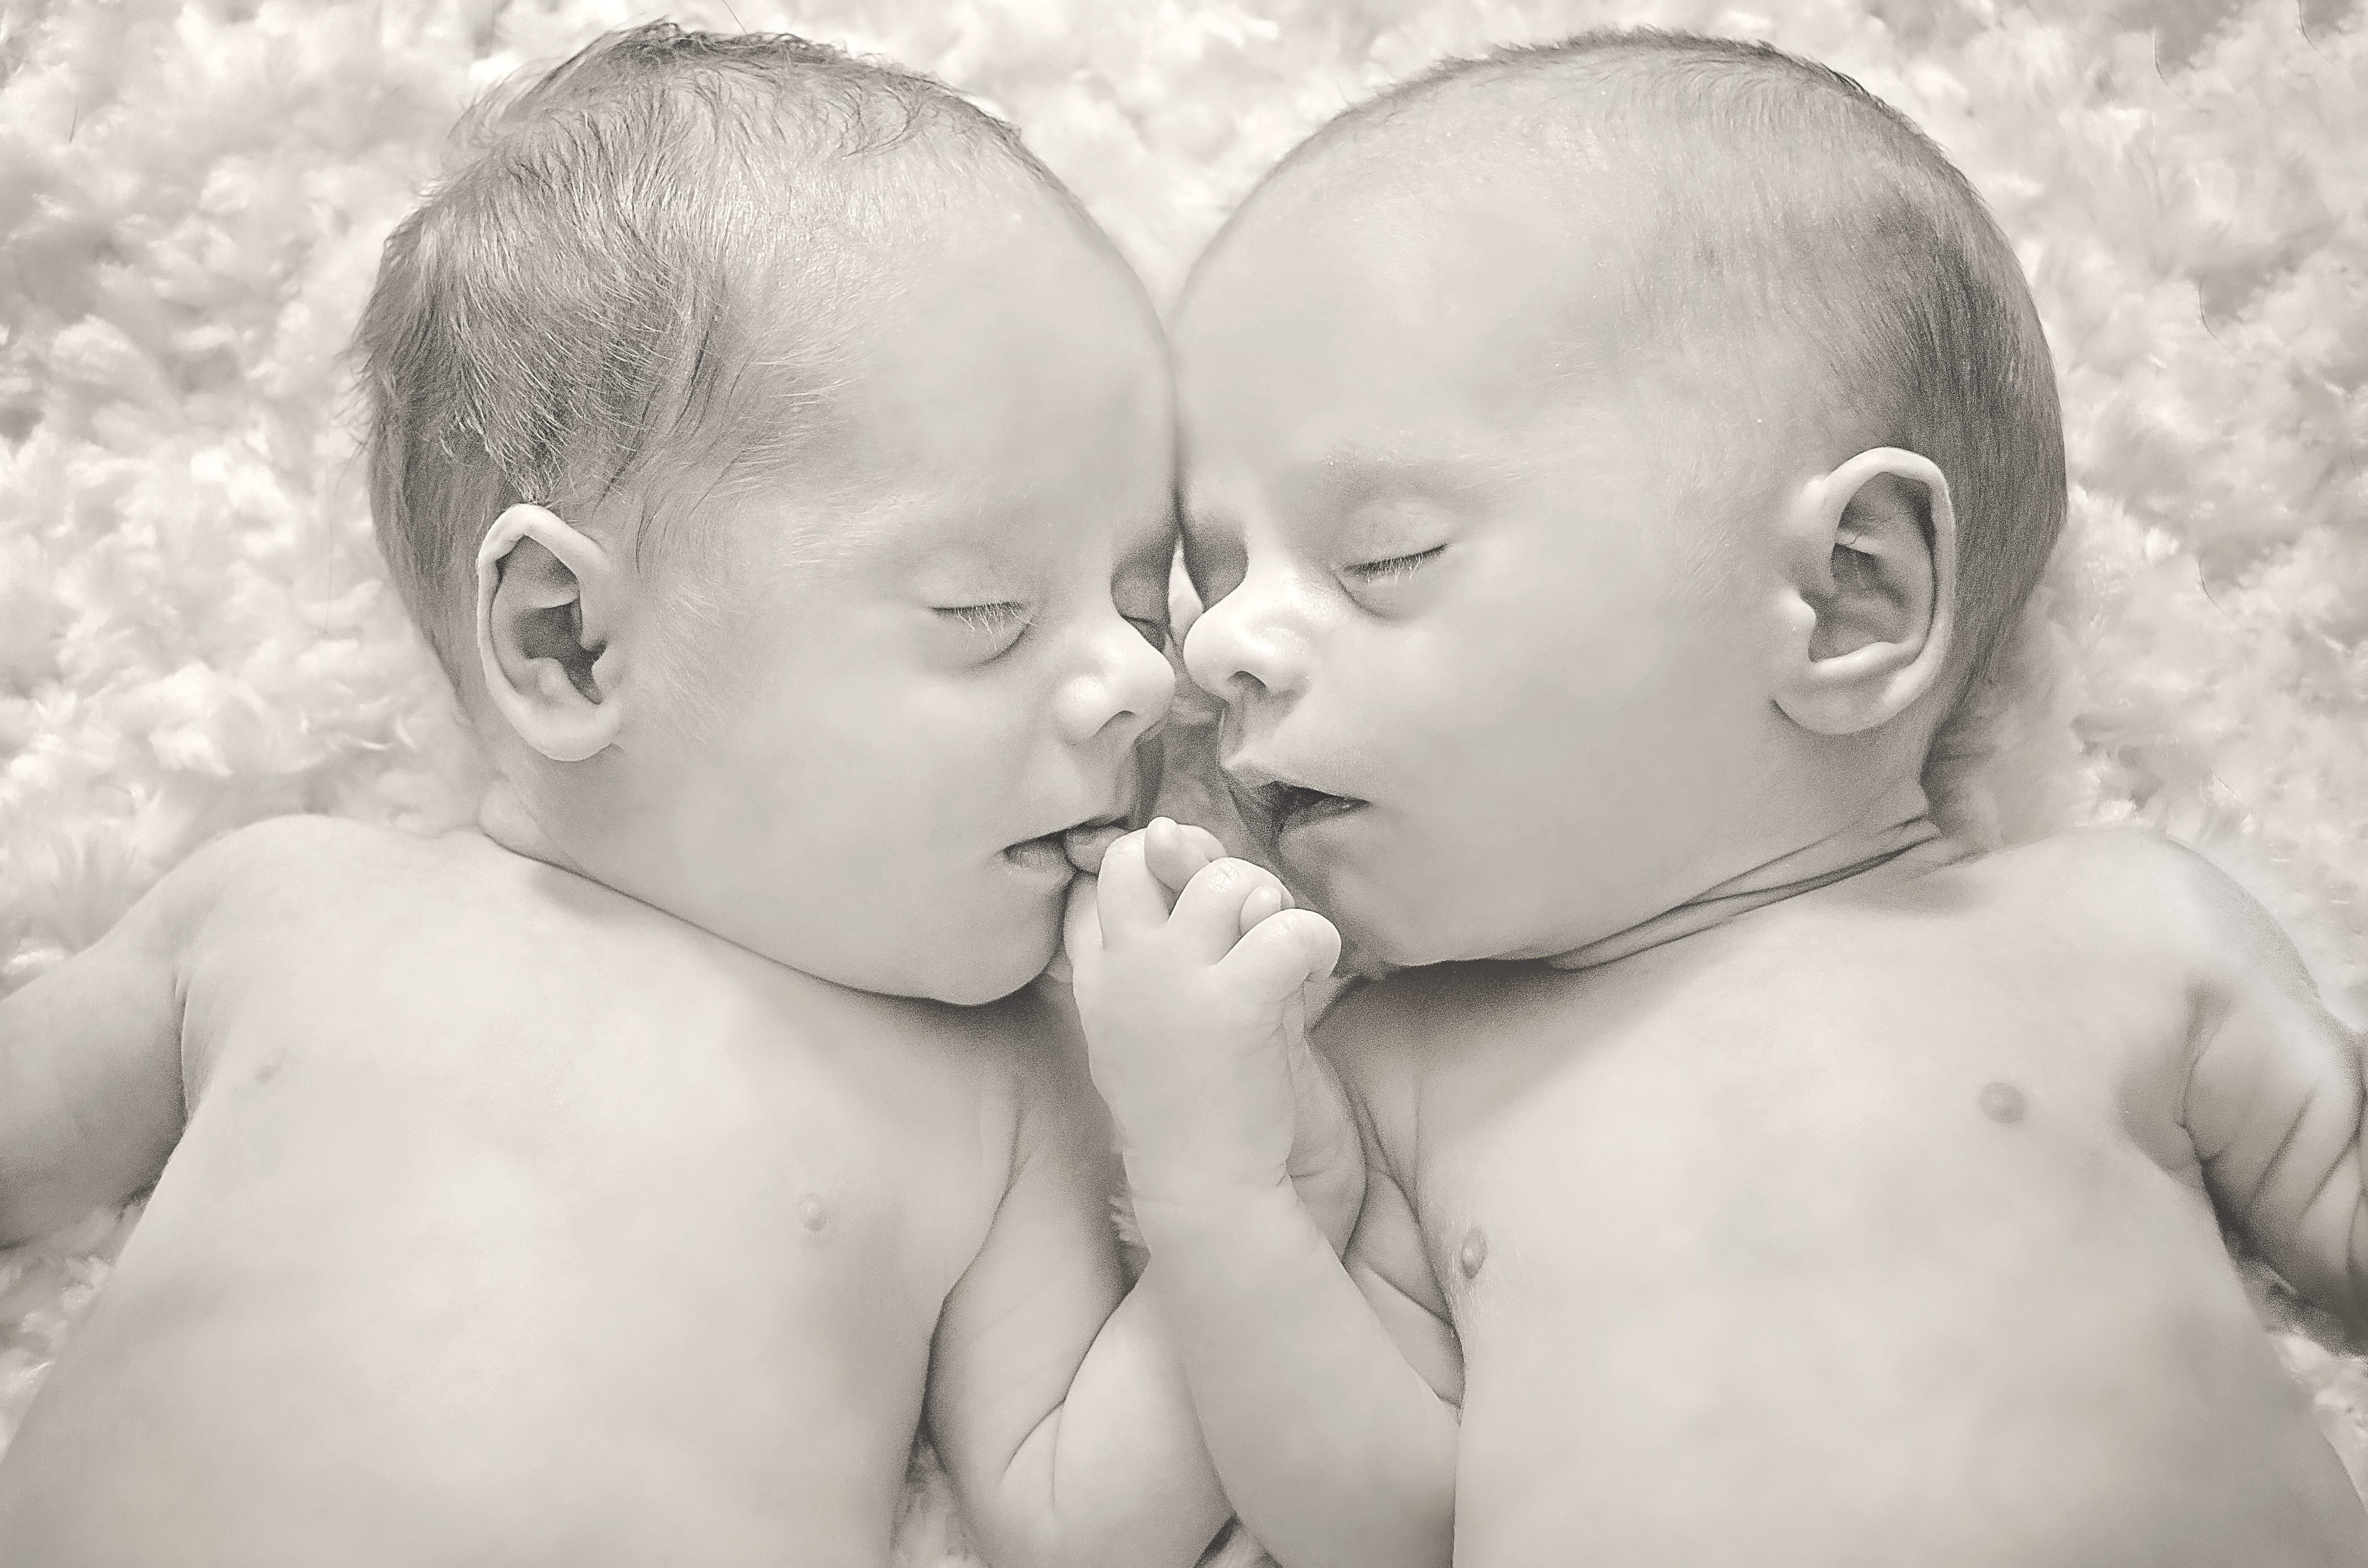 Twin babies in Neo natal care unit 